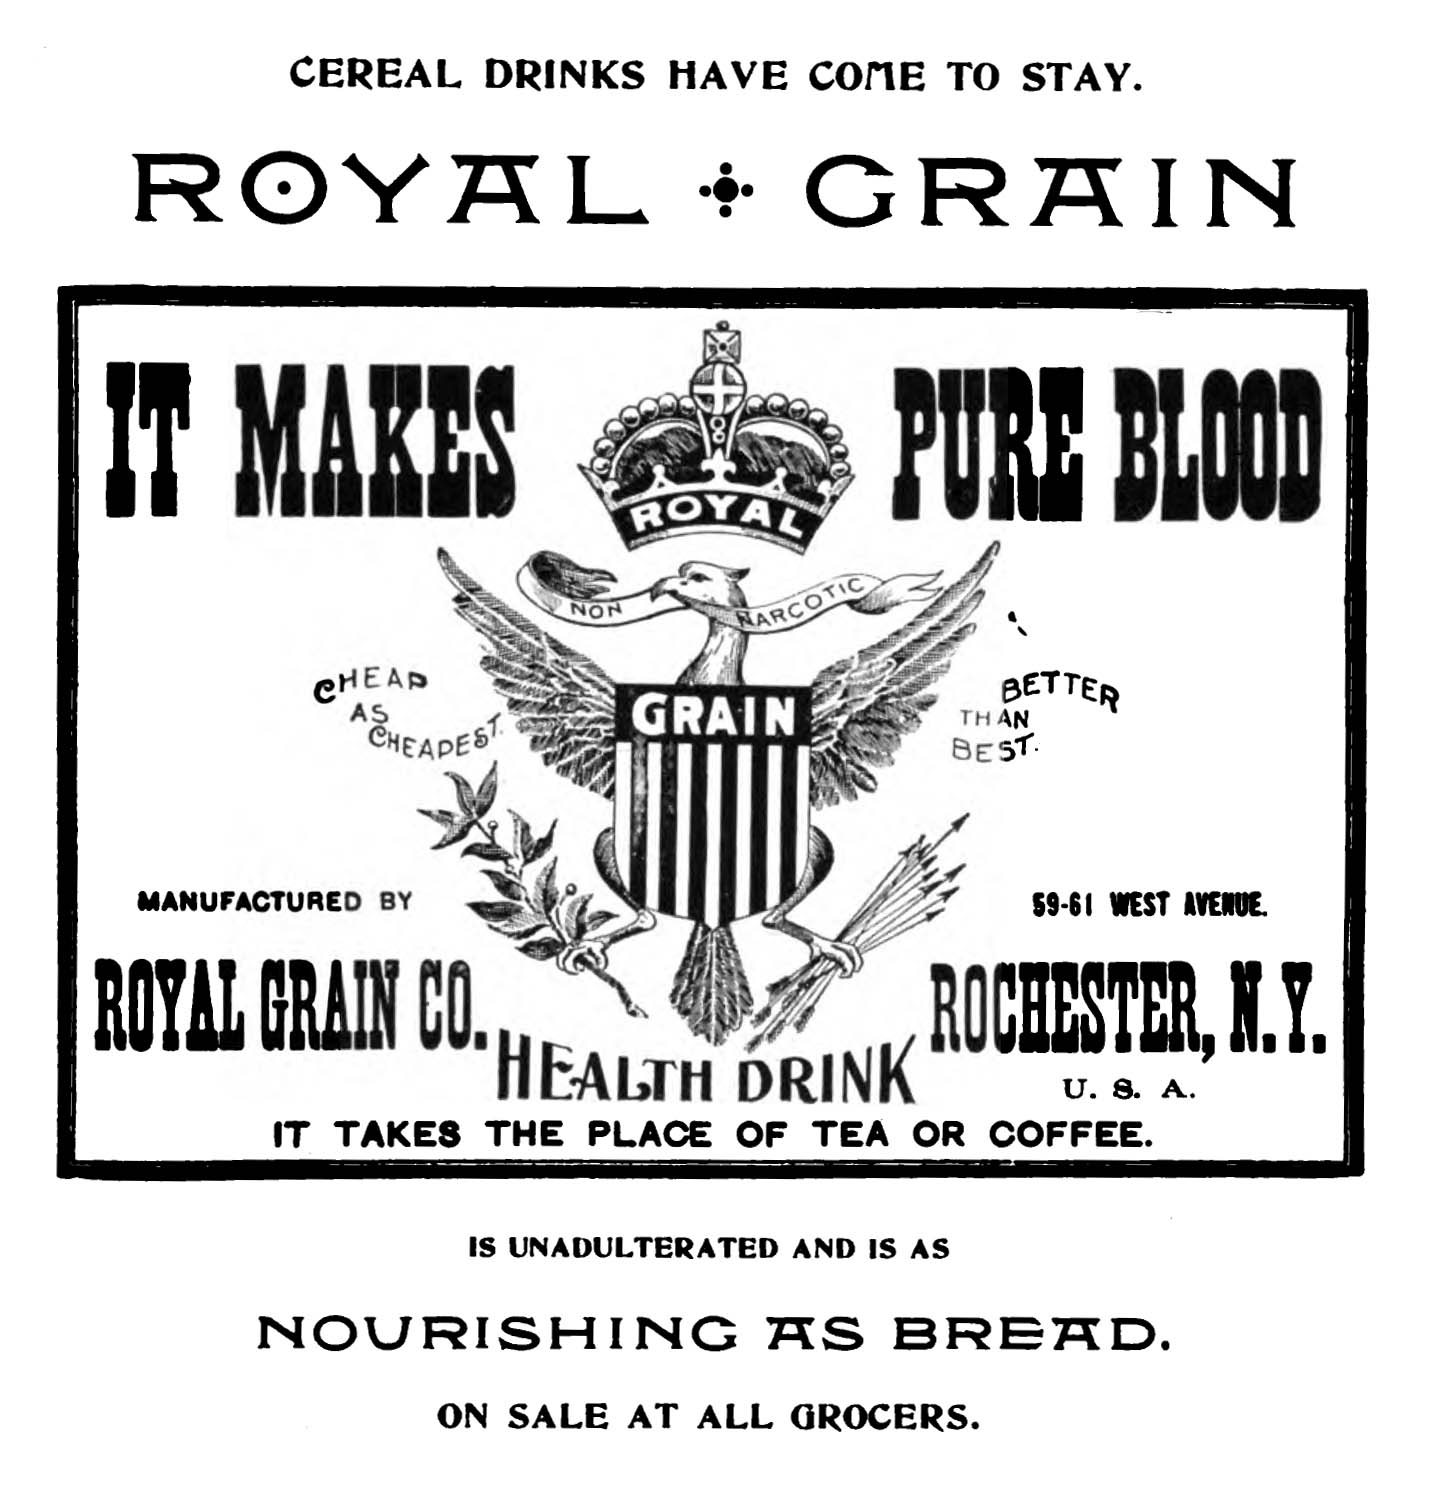 Cereal Drink - ad - 1897